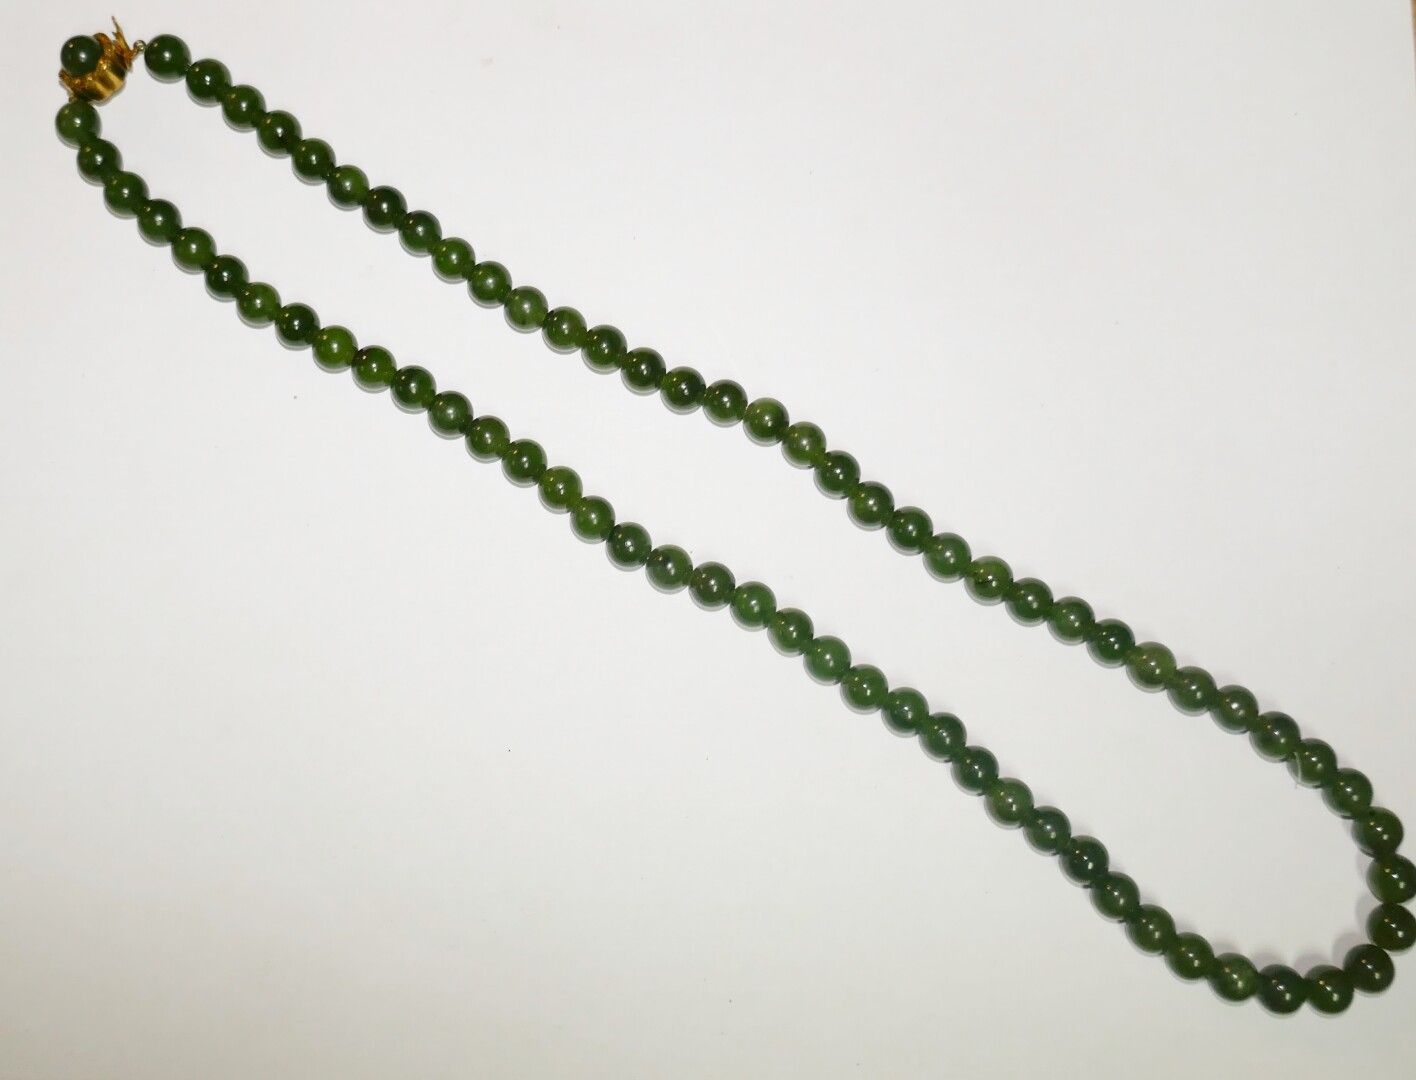 Null Necklace of balls (probably nephrite jade), 61,1 grs, L. 58 cm